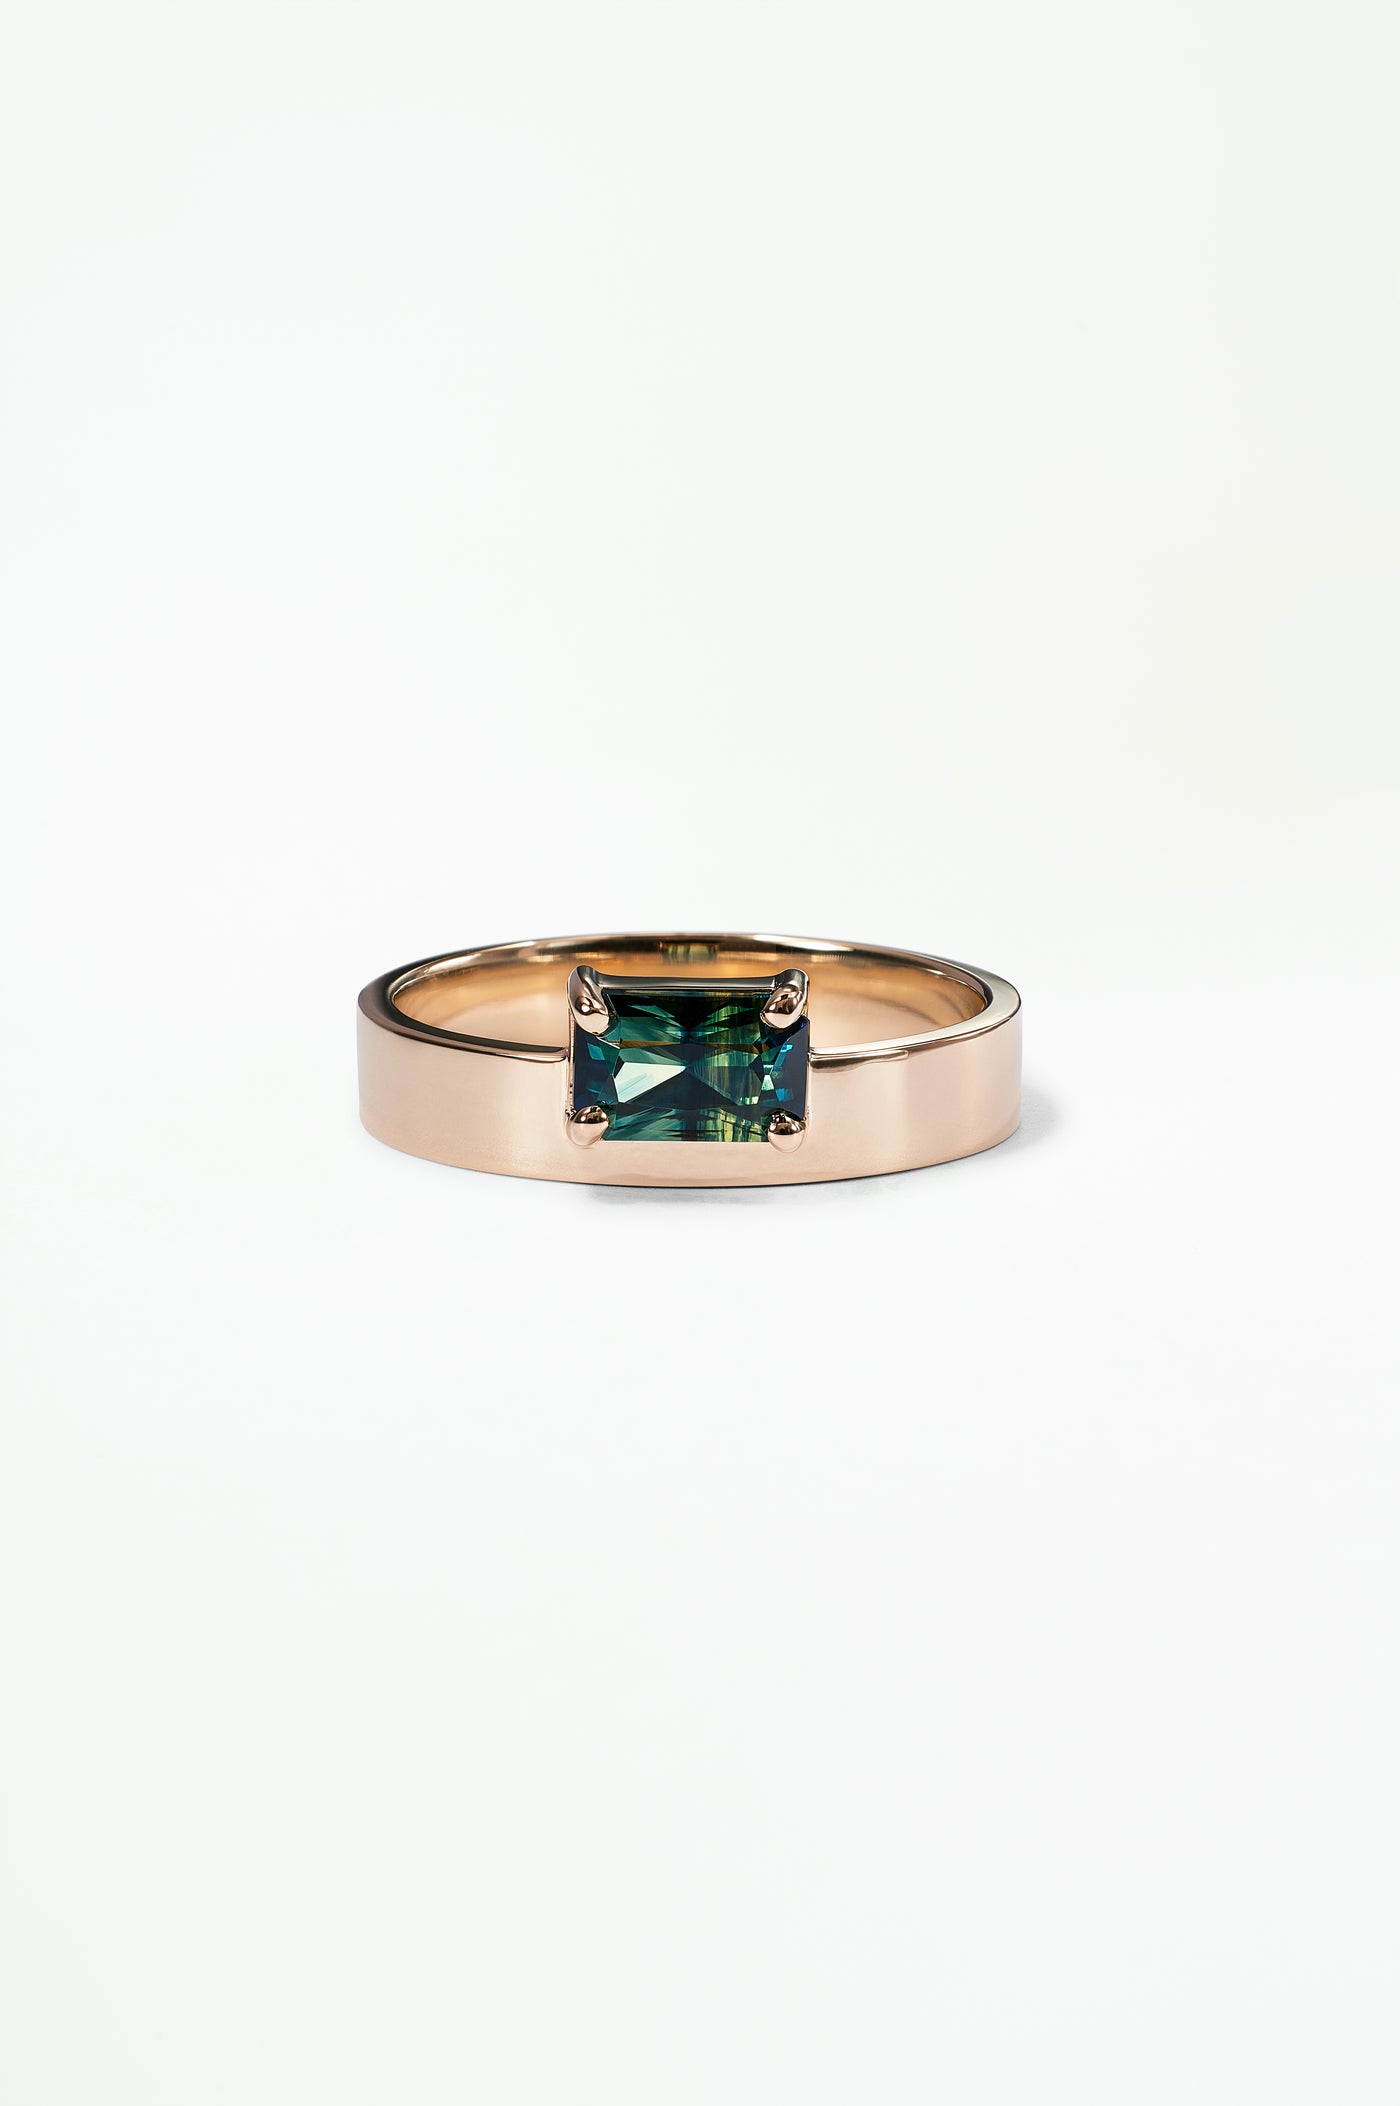 One of a Kind Emerald Cut Sapphire Monolith Ring No. 2